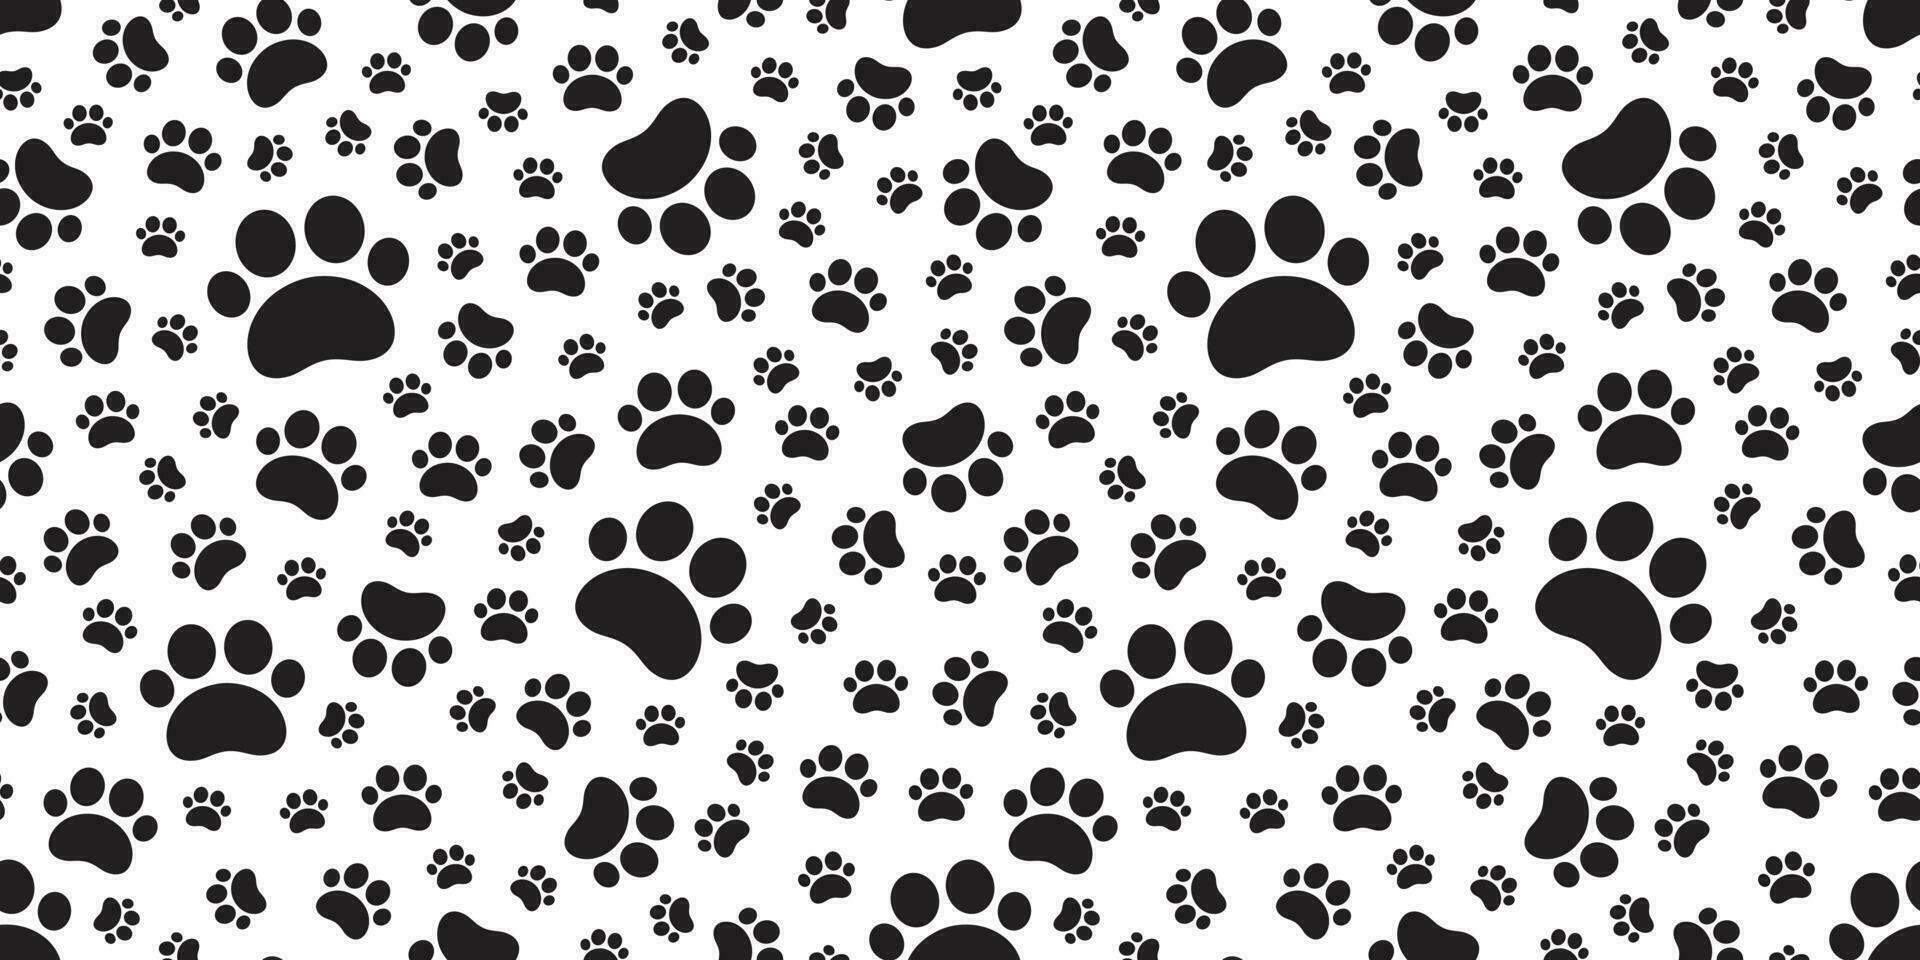 Dog Paw seamless pattern vector cat footprint tile background repeat wallpaper scarf isolated cartoon illustration doodle